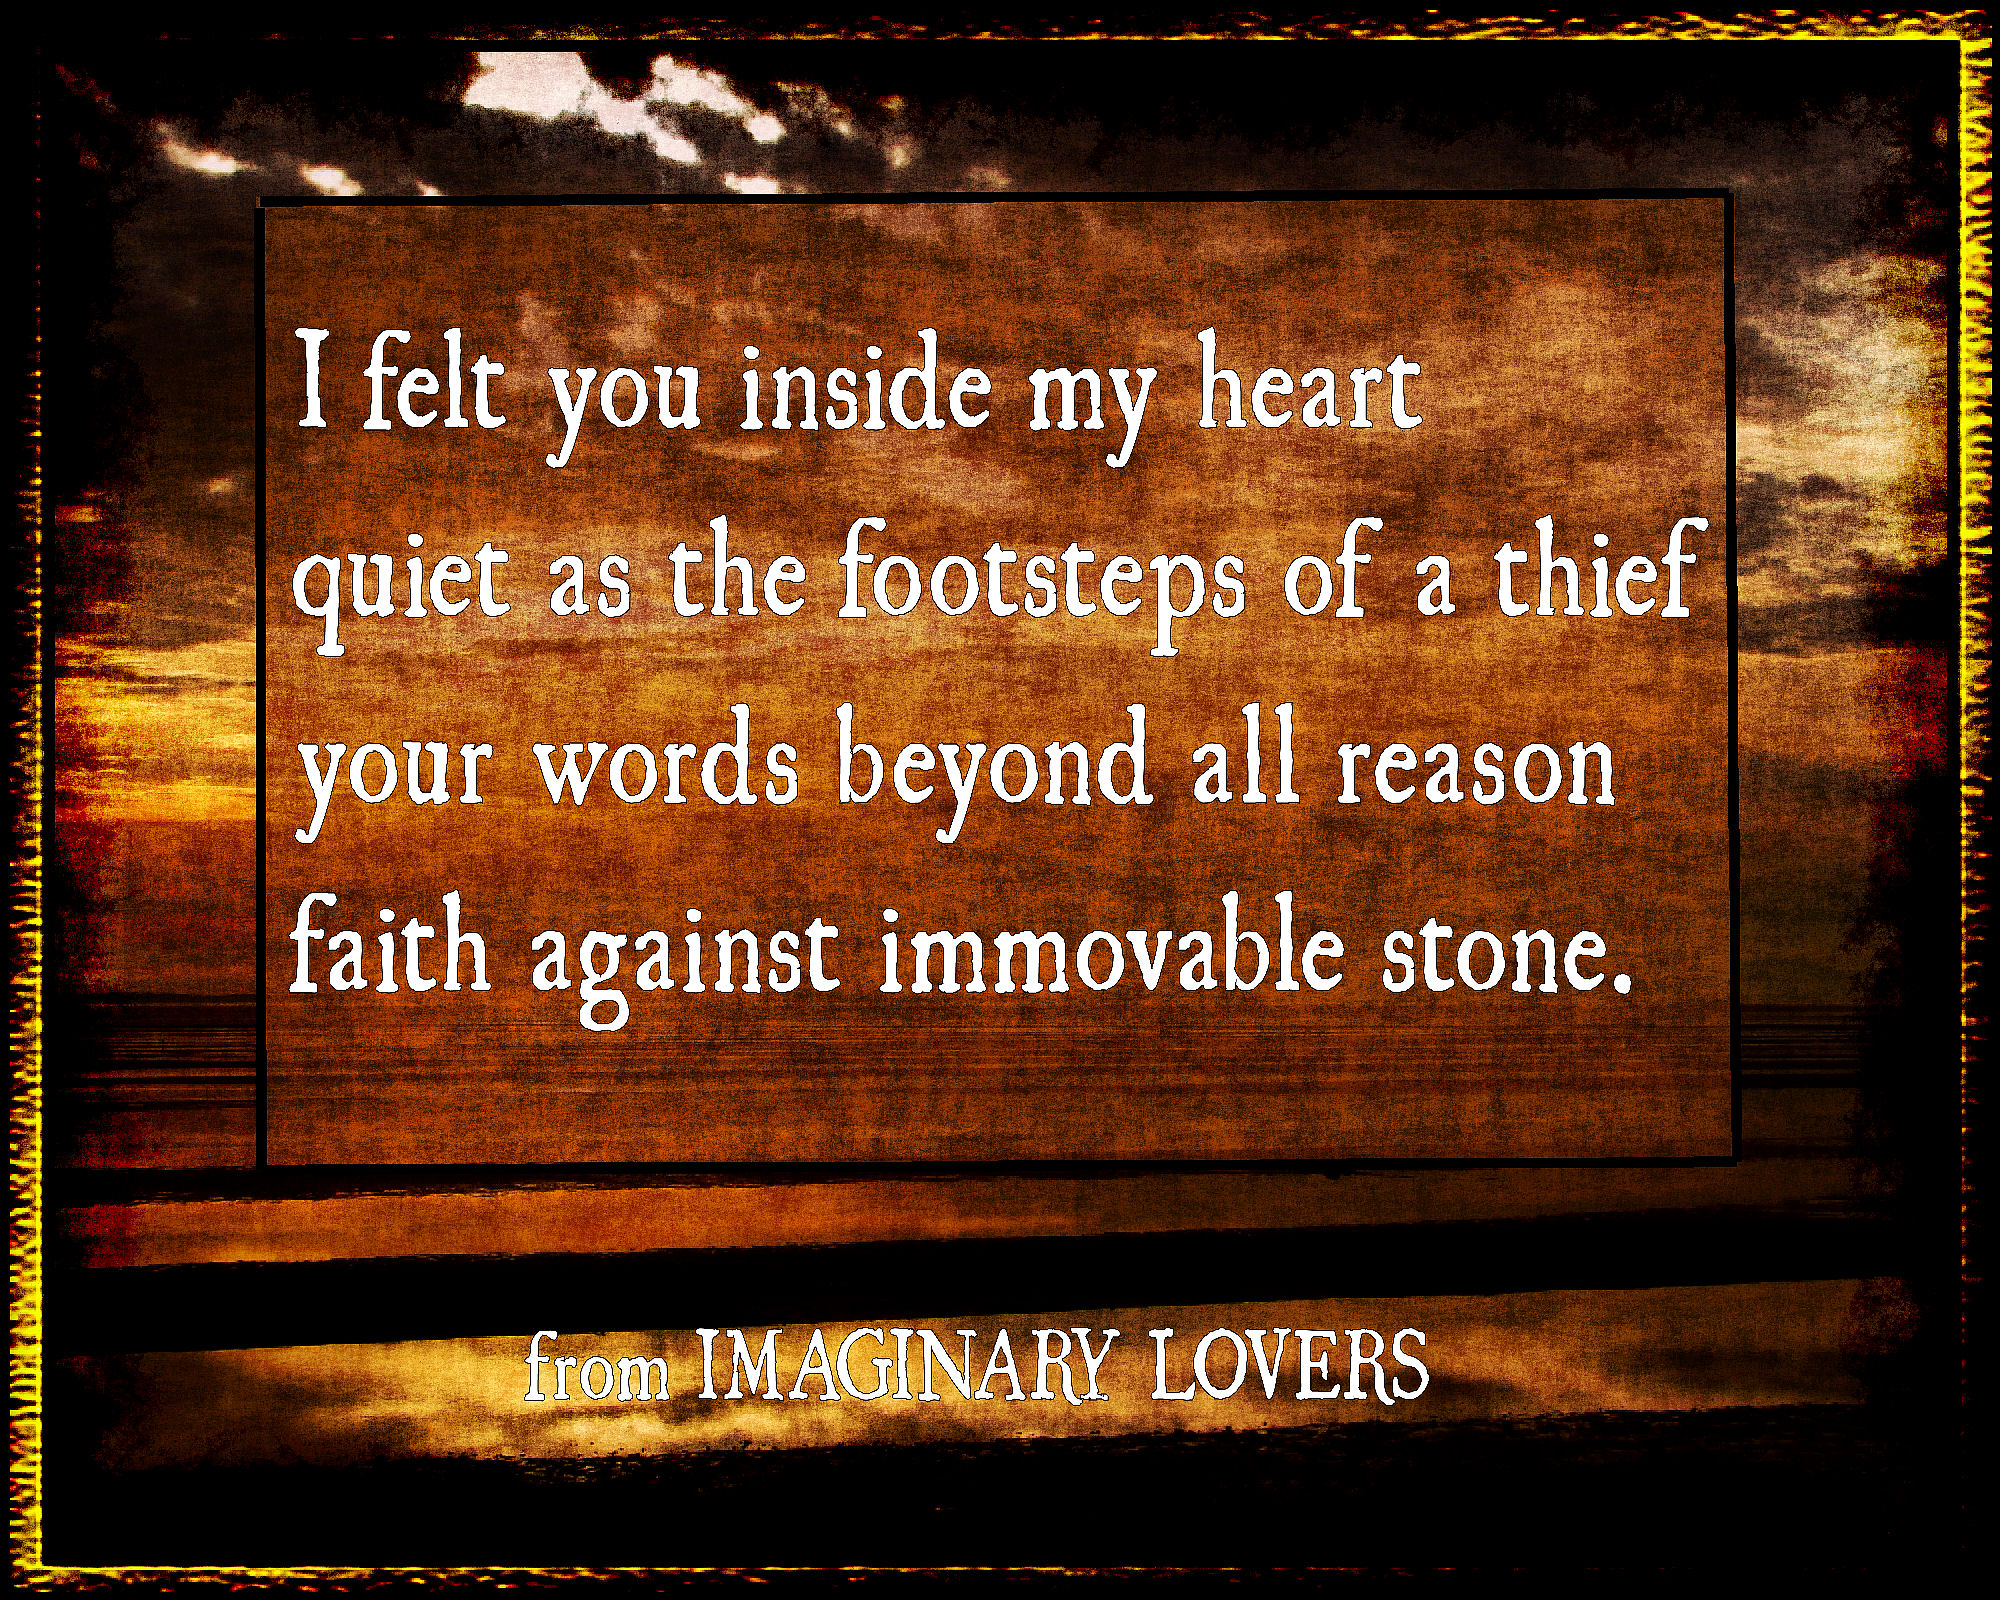 sample from Kate Taylor's poetry book IMAGINARY LOVERS I felt you inside my heart, quiet as the footsteps of a thief, your words beyon all reason, faith against immovable stone.